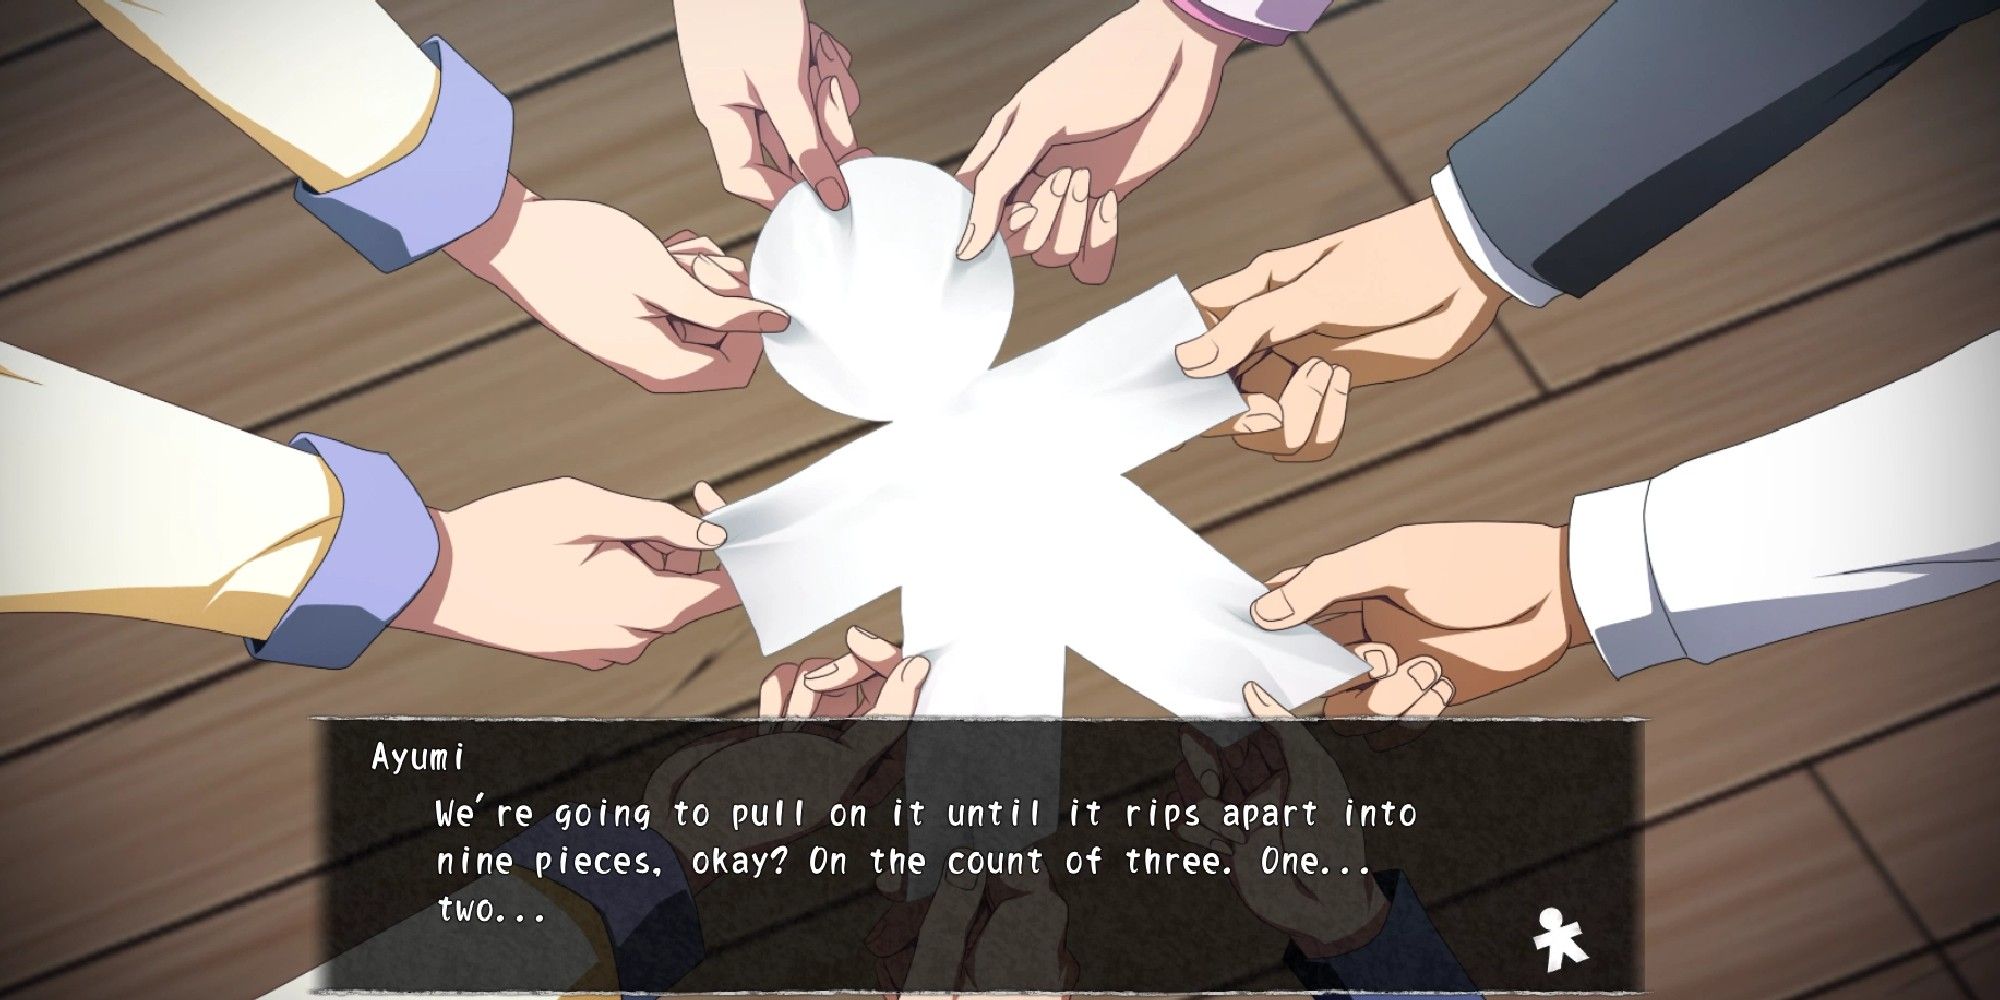 Corpse Party: The Terror Starts With A Paper Charm